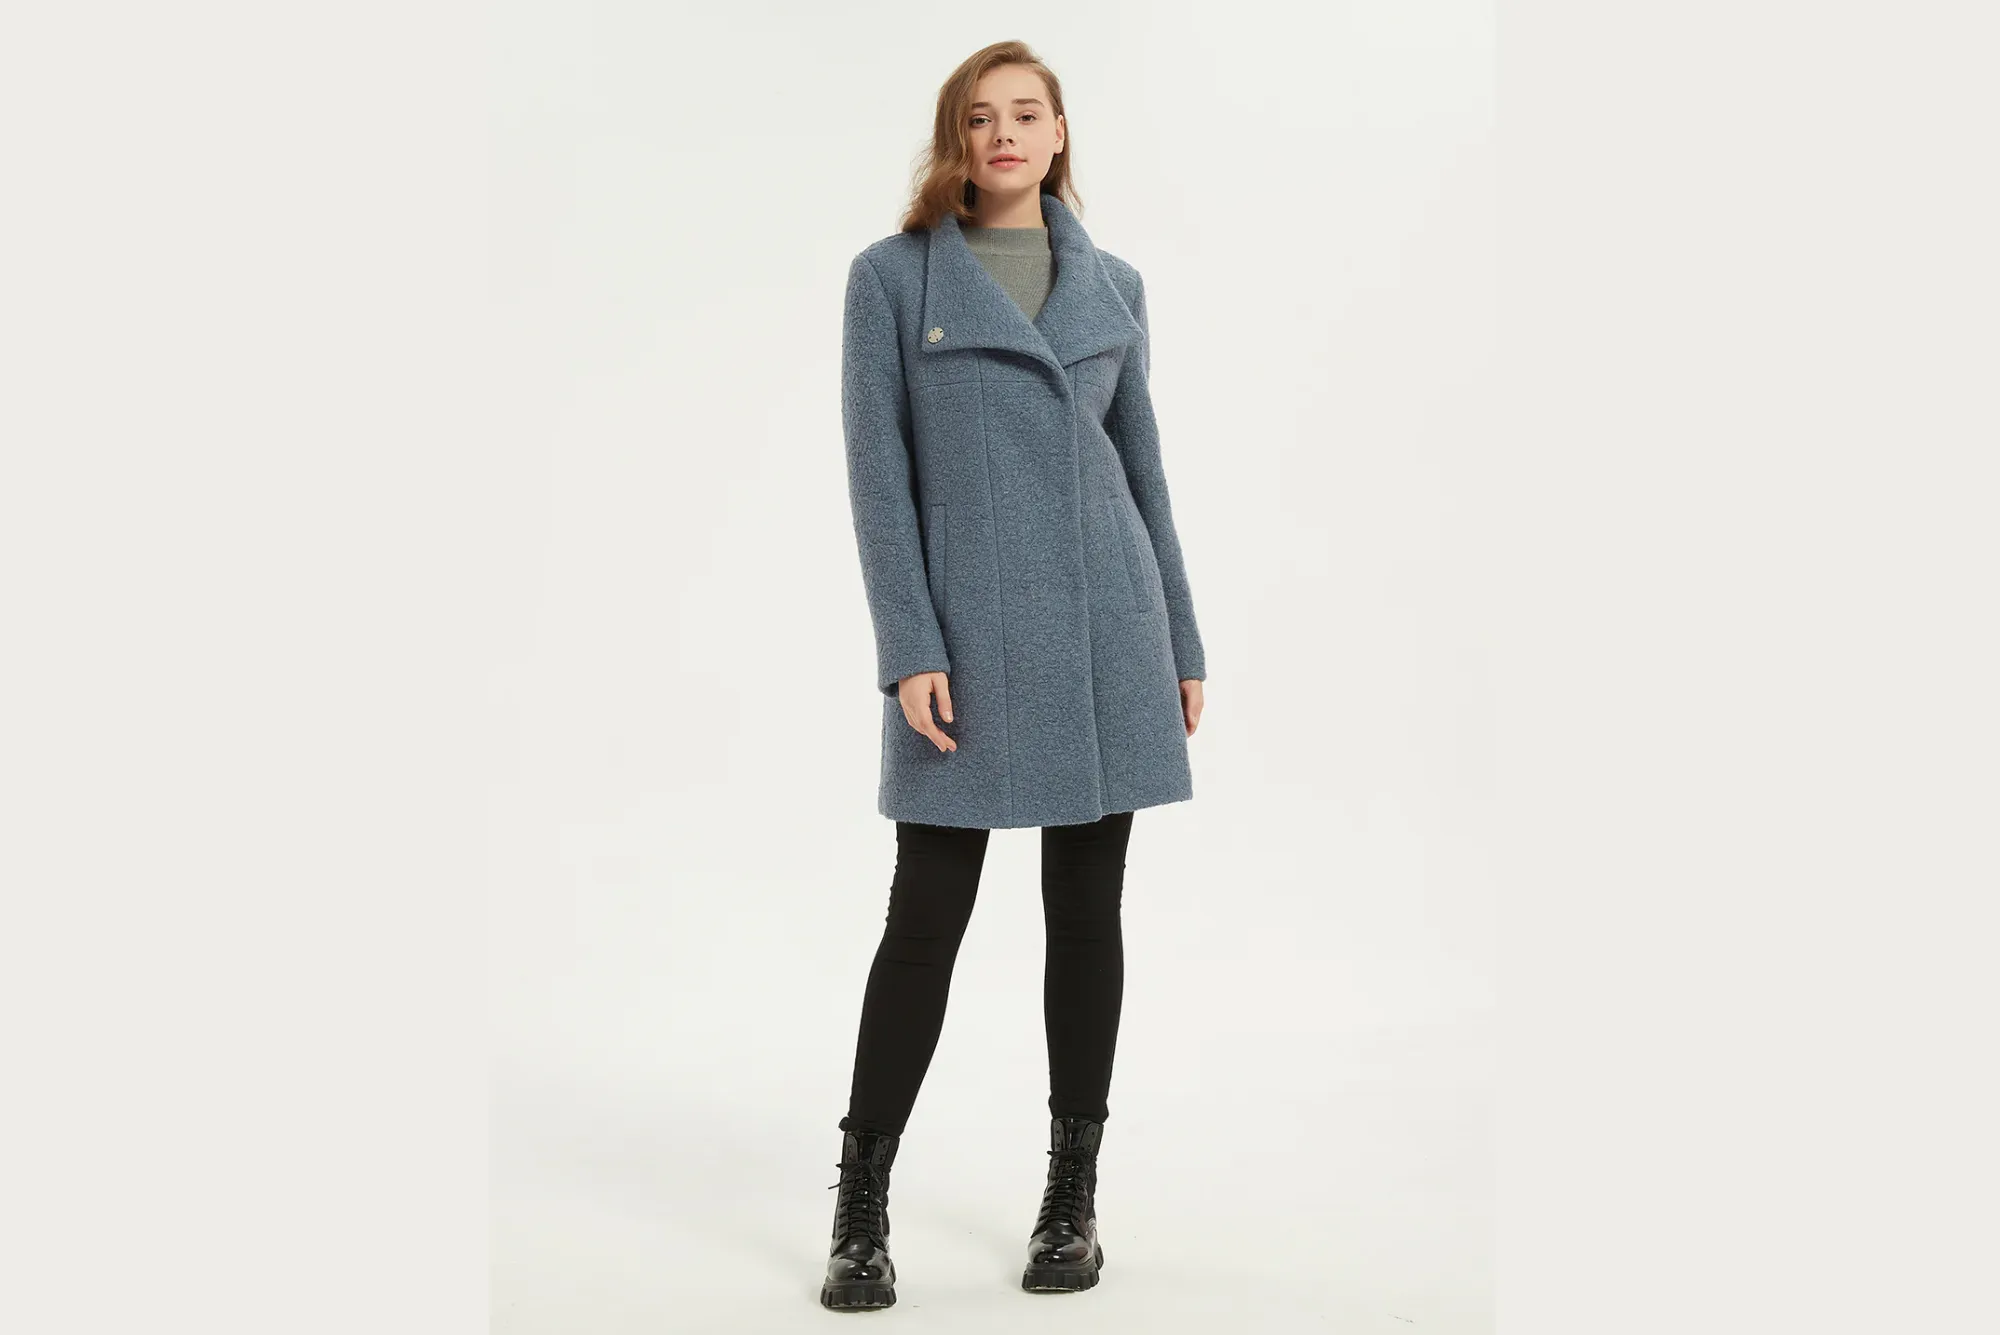 IKAZZ's Women's Wool Coat Collection